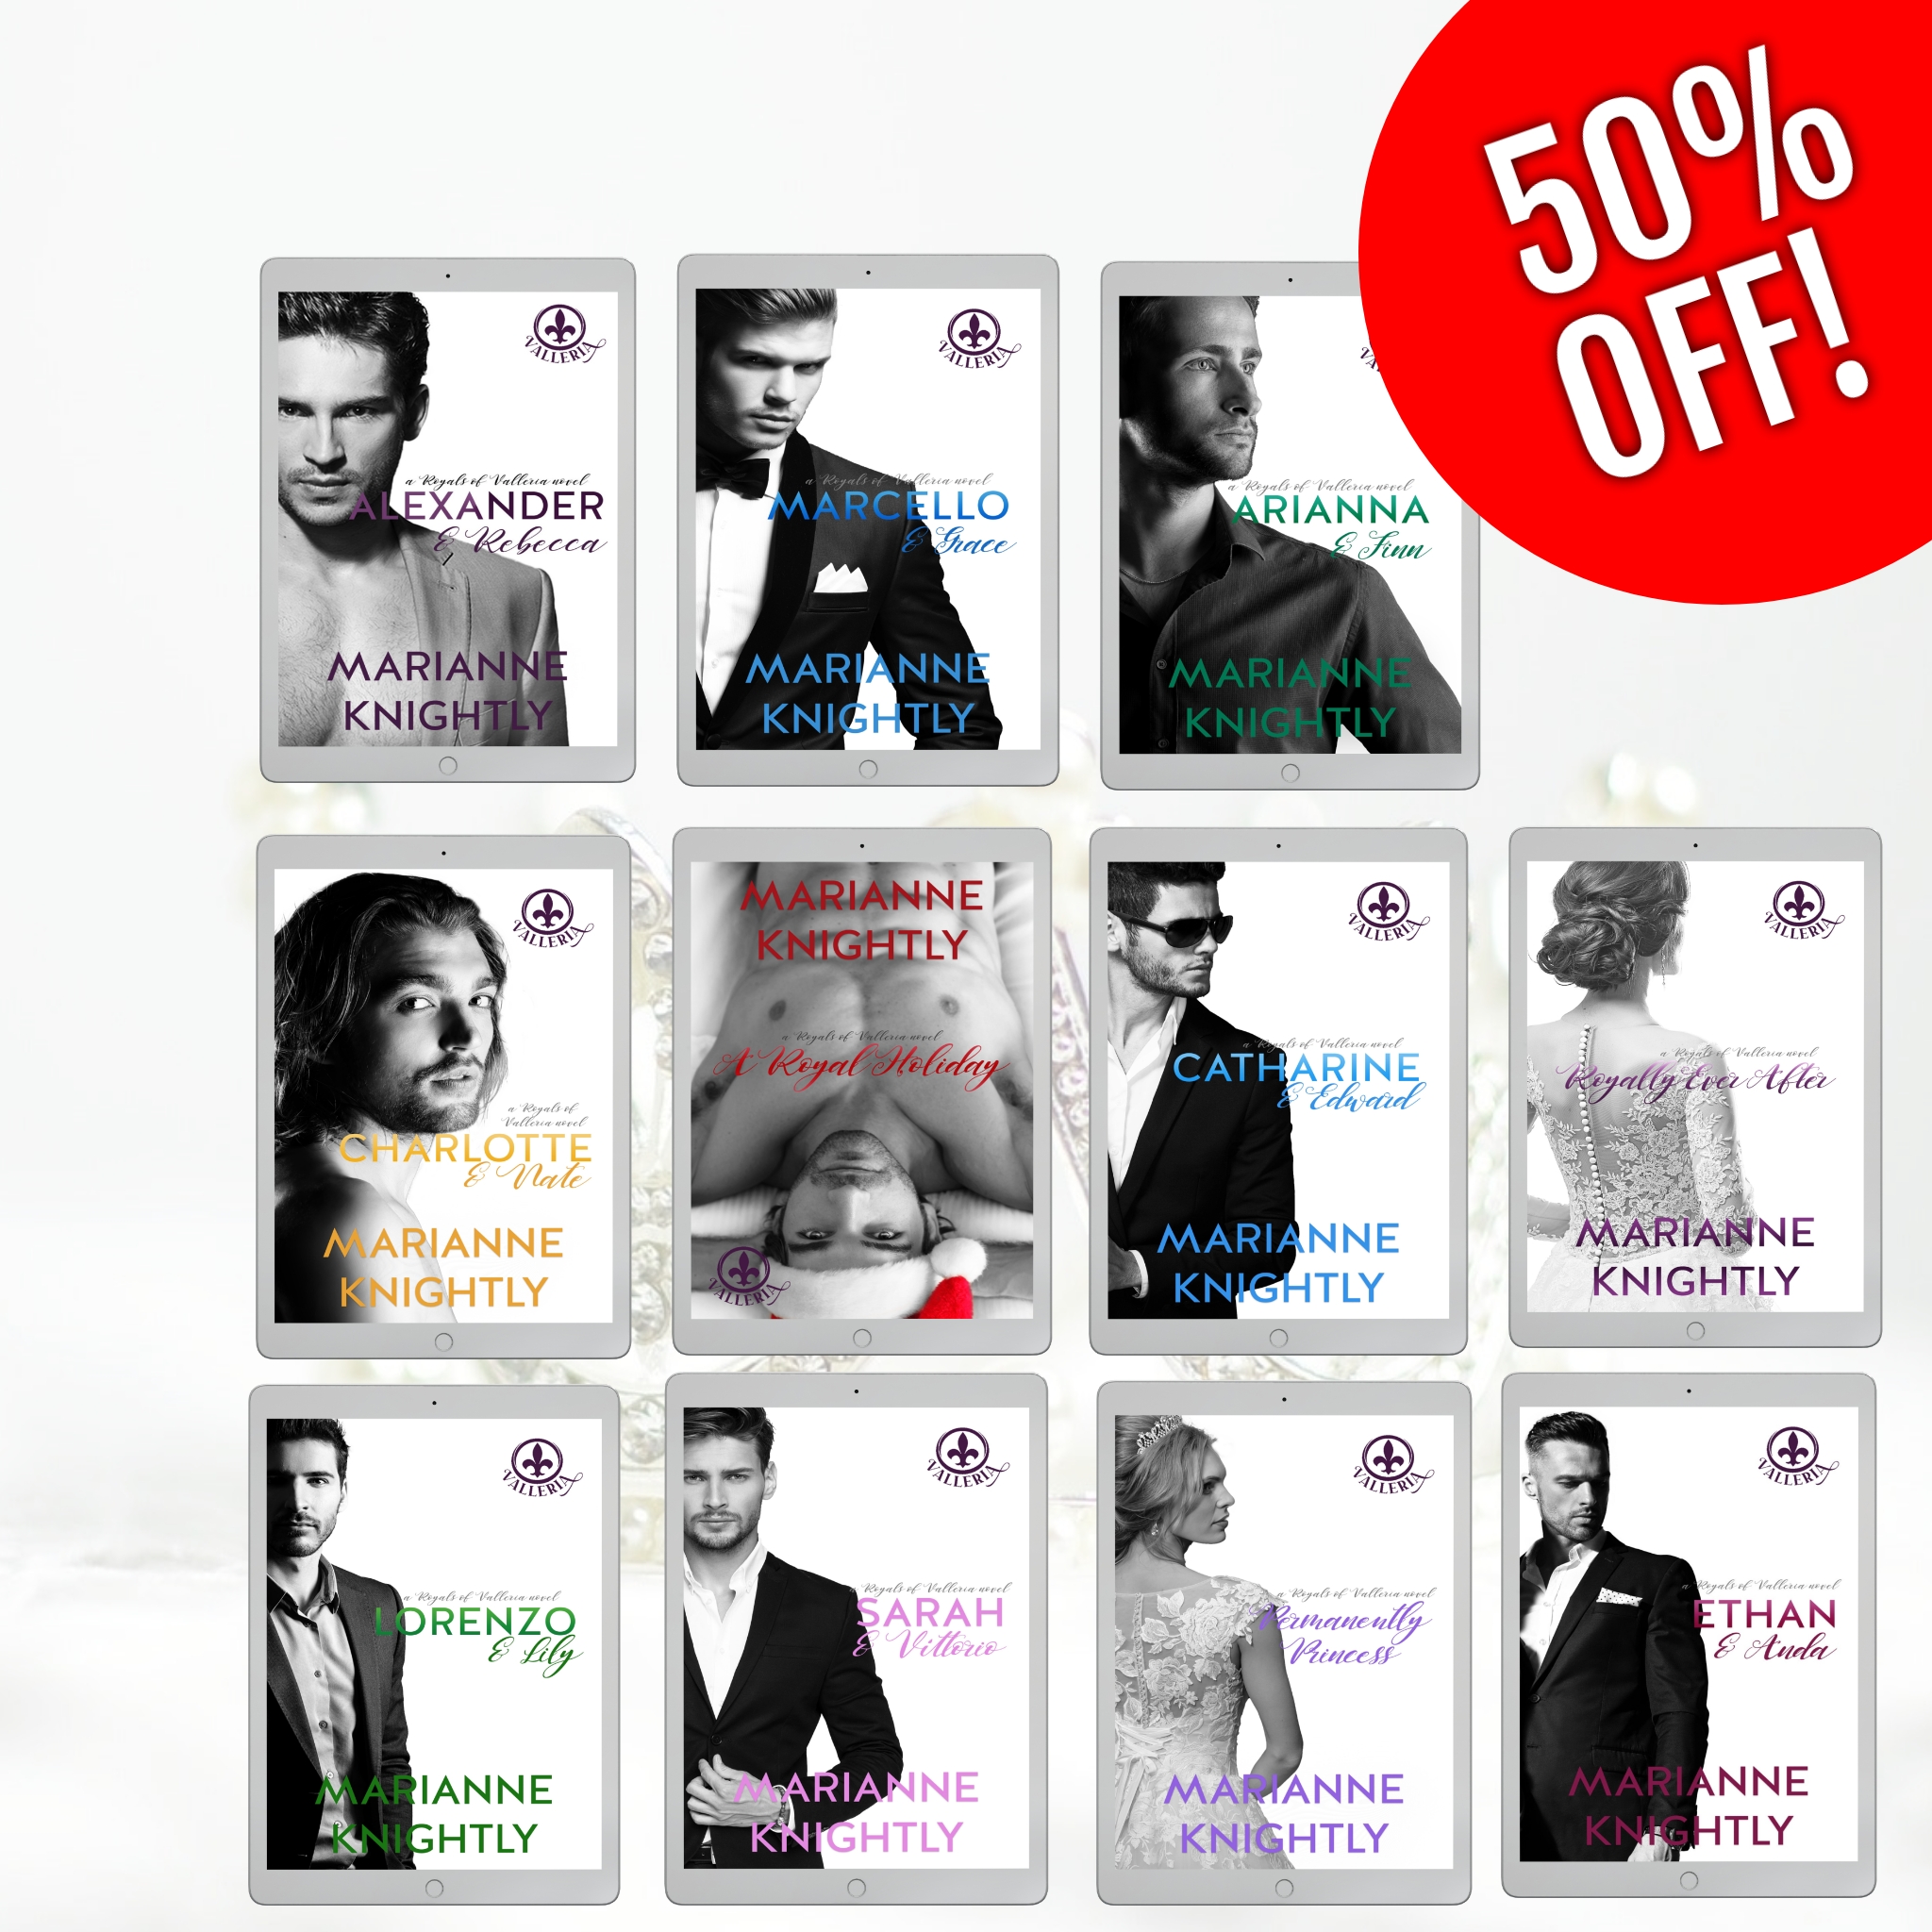 Get 50% off books in Marianne Knightly's Royals of Valleria series!